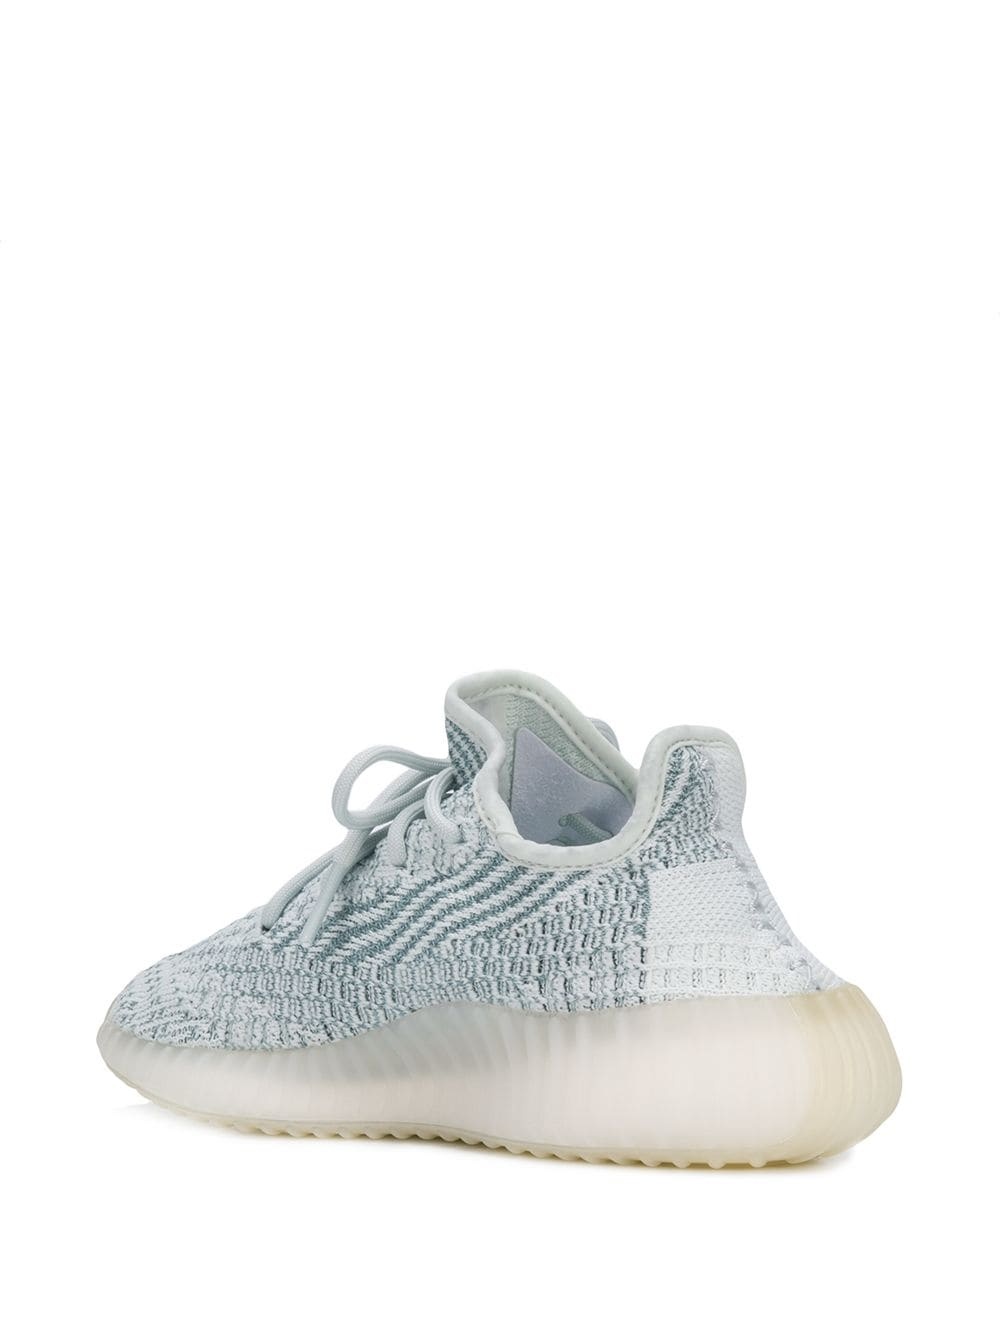 Yeezy Boost 350 V2 "Cloud White" - Reflective - 3